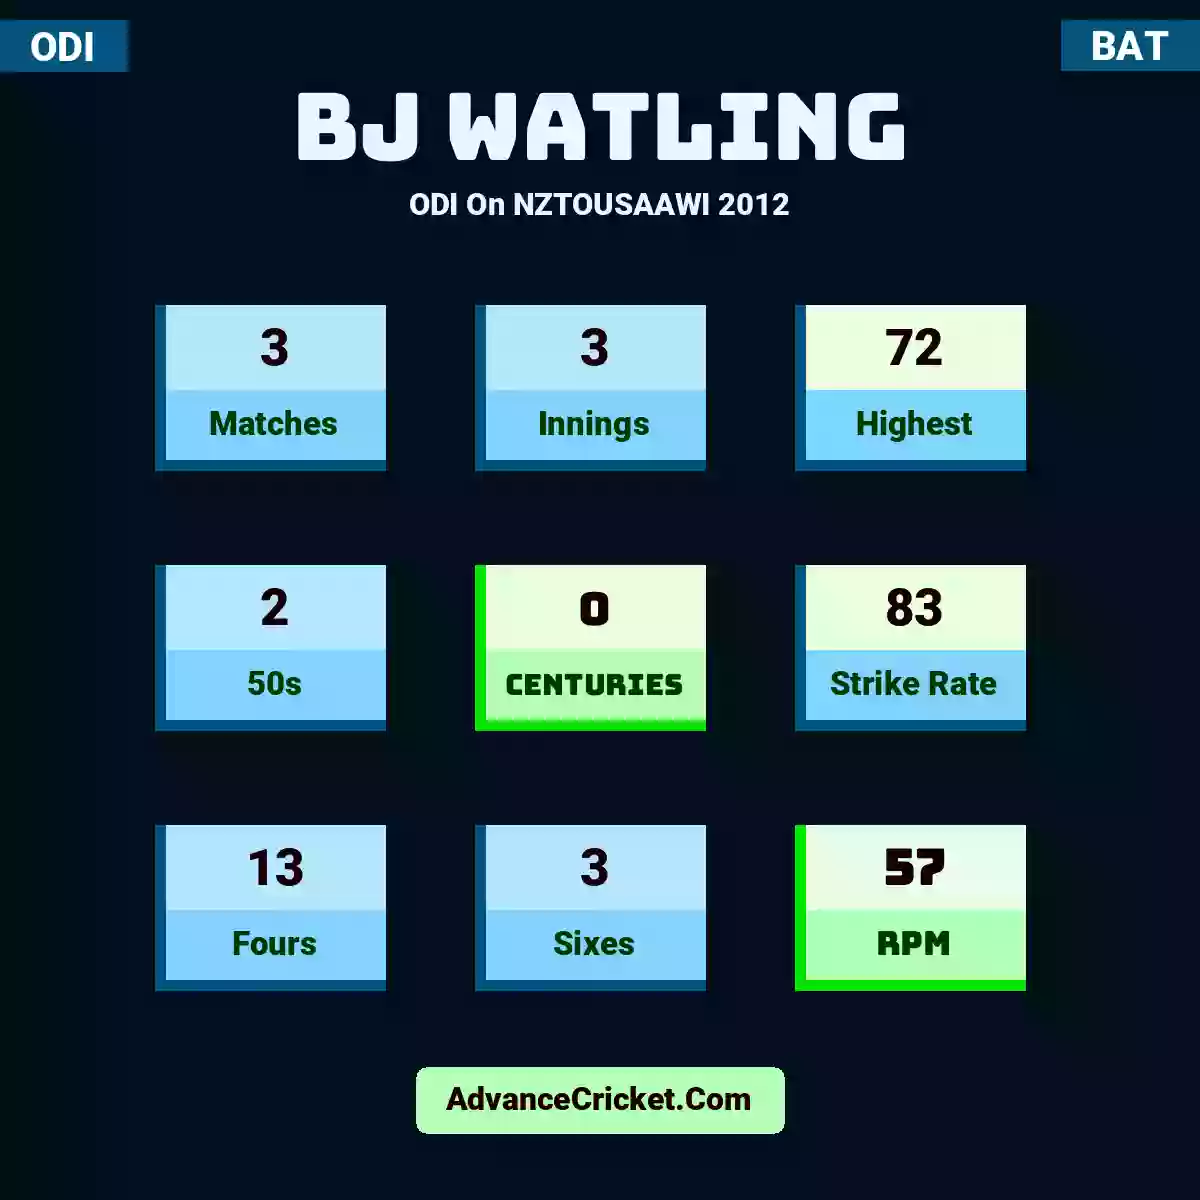 BJ Watling ODI  On NZTOUSAAWI 2012, BJ Watling played 3 matches, scored 72 runs as highest, 2 half-centuries, and 0 centuries, with a strike rate of 83. B.Watling hit 13 fours and 3 sixes, with an RPM of 57.